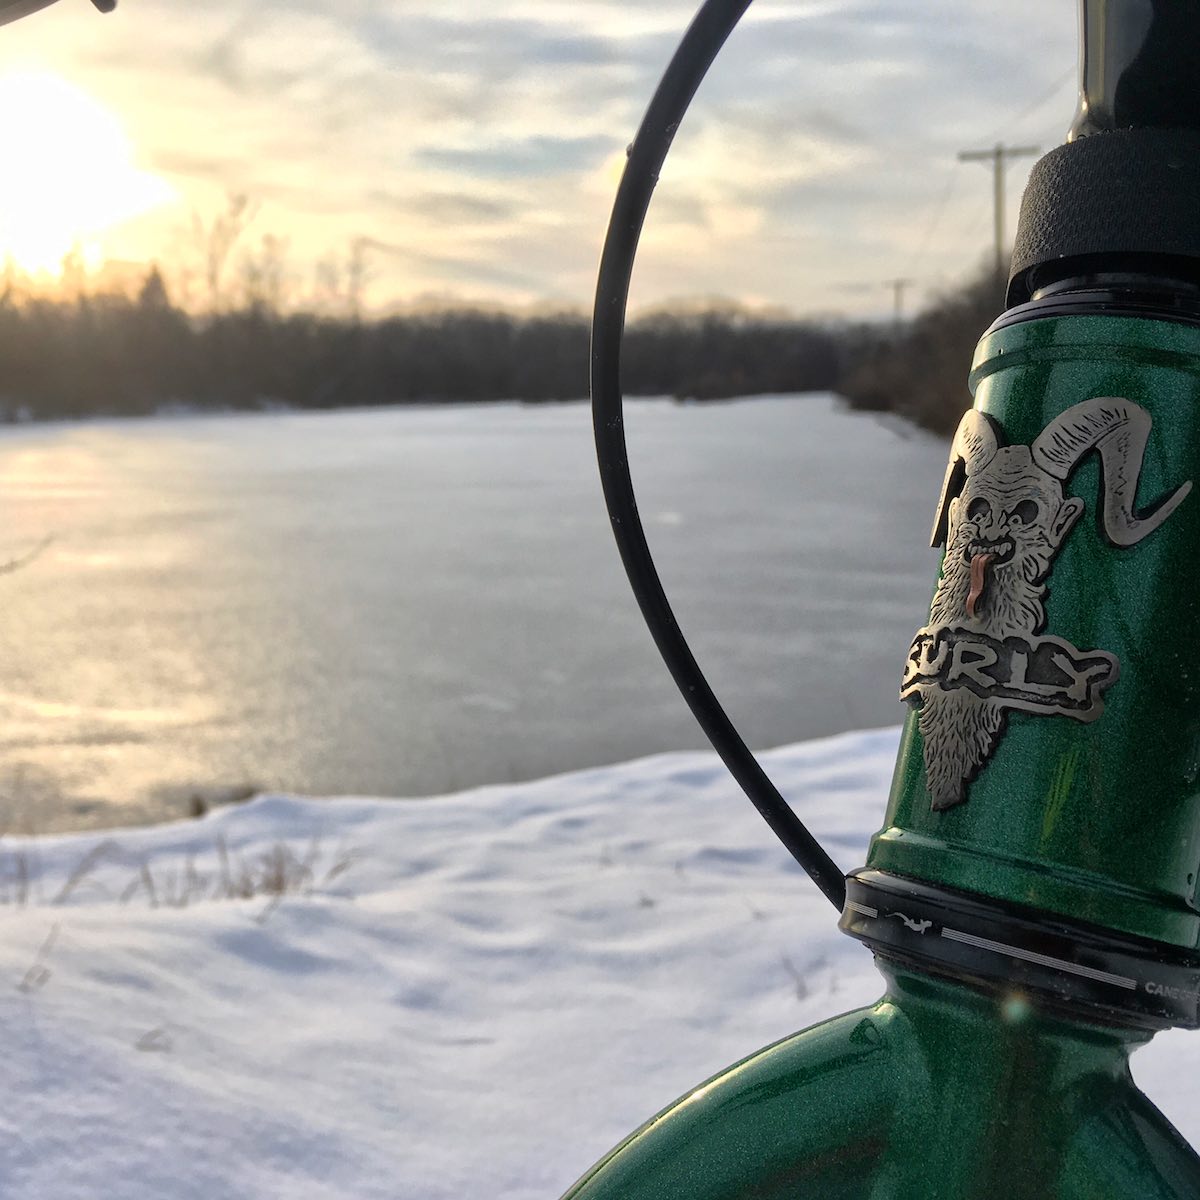 surly krampus headbadge looking out over the semi frozen lake and snowy bank at Homewood Izaak Walton Preserve, Homewood, Illinois.